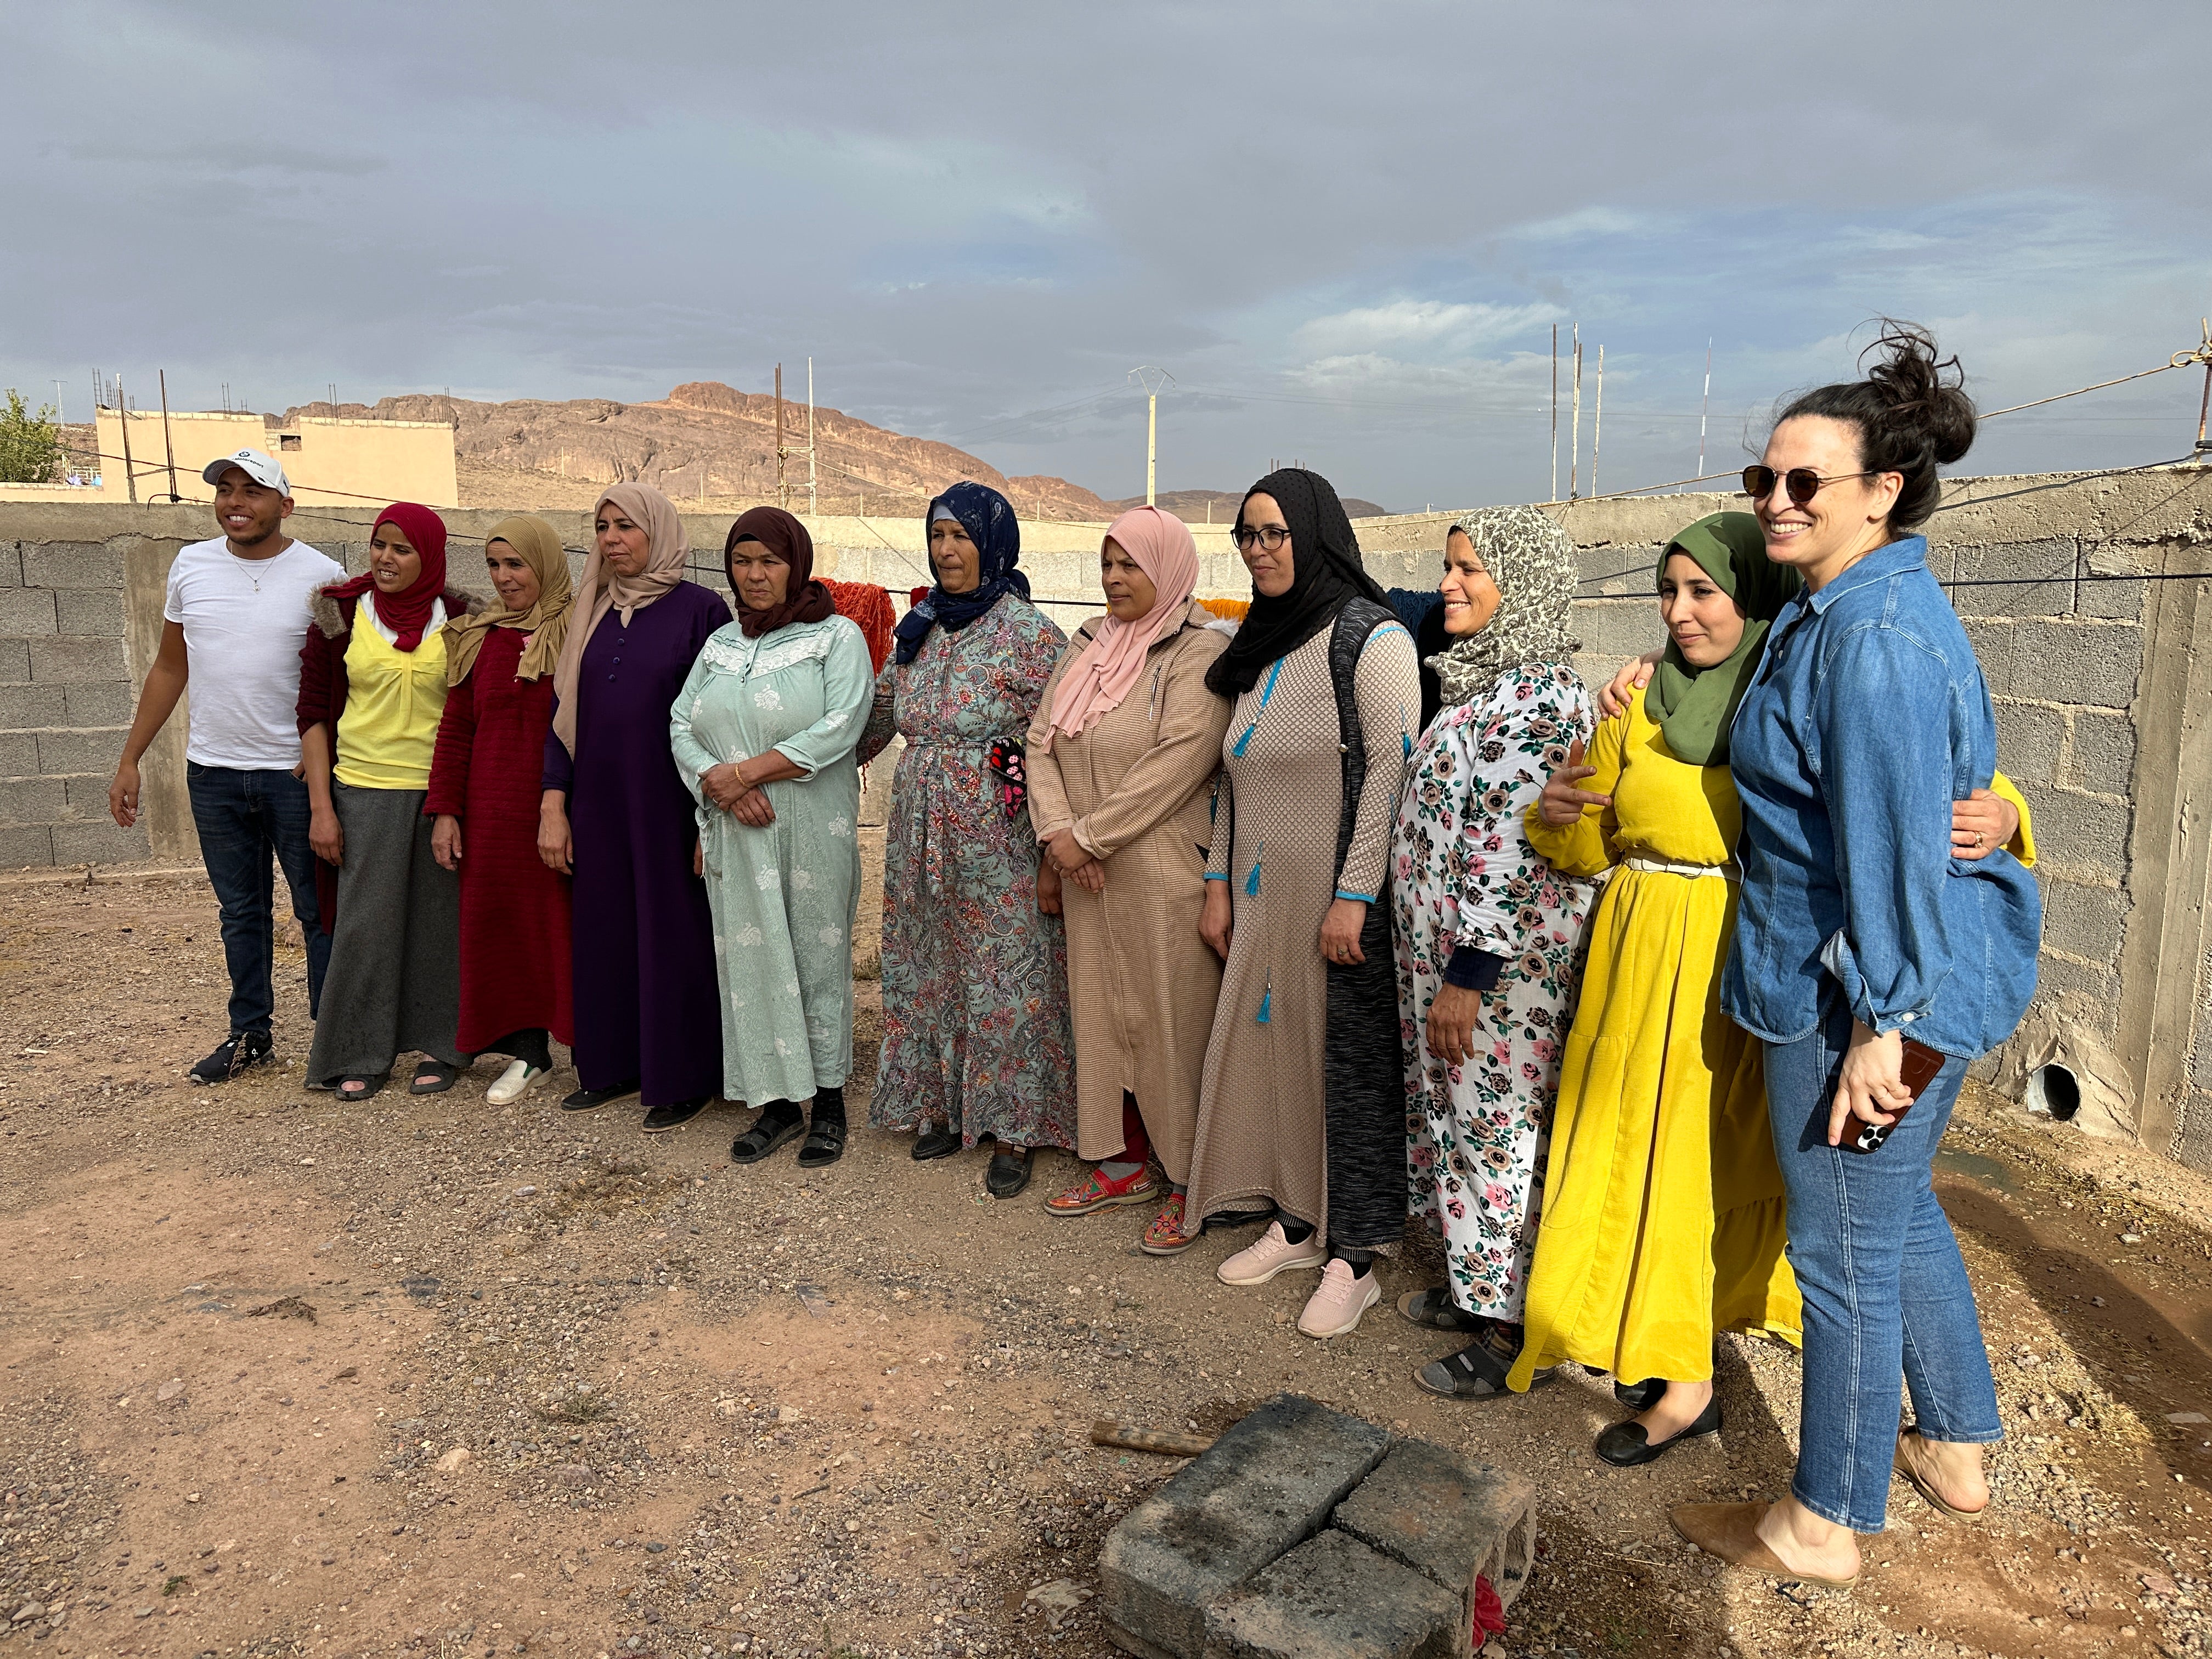 A group of women and community members stand together laughing and smiling.